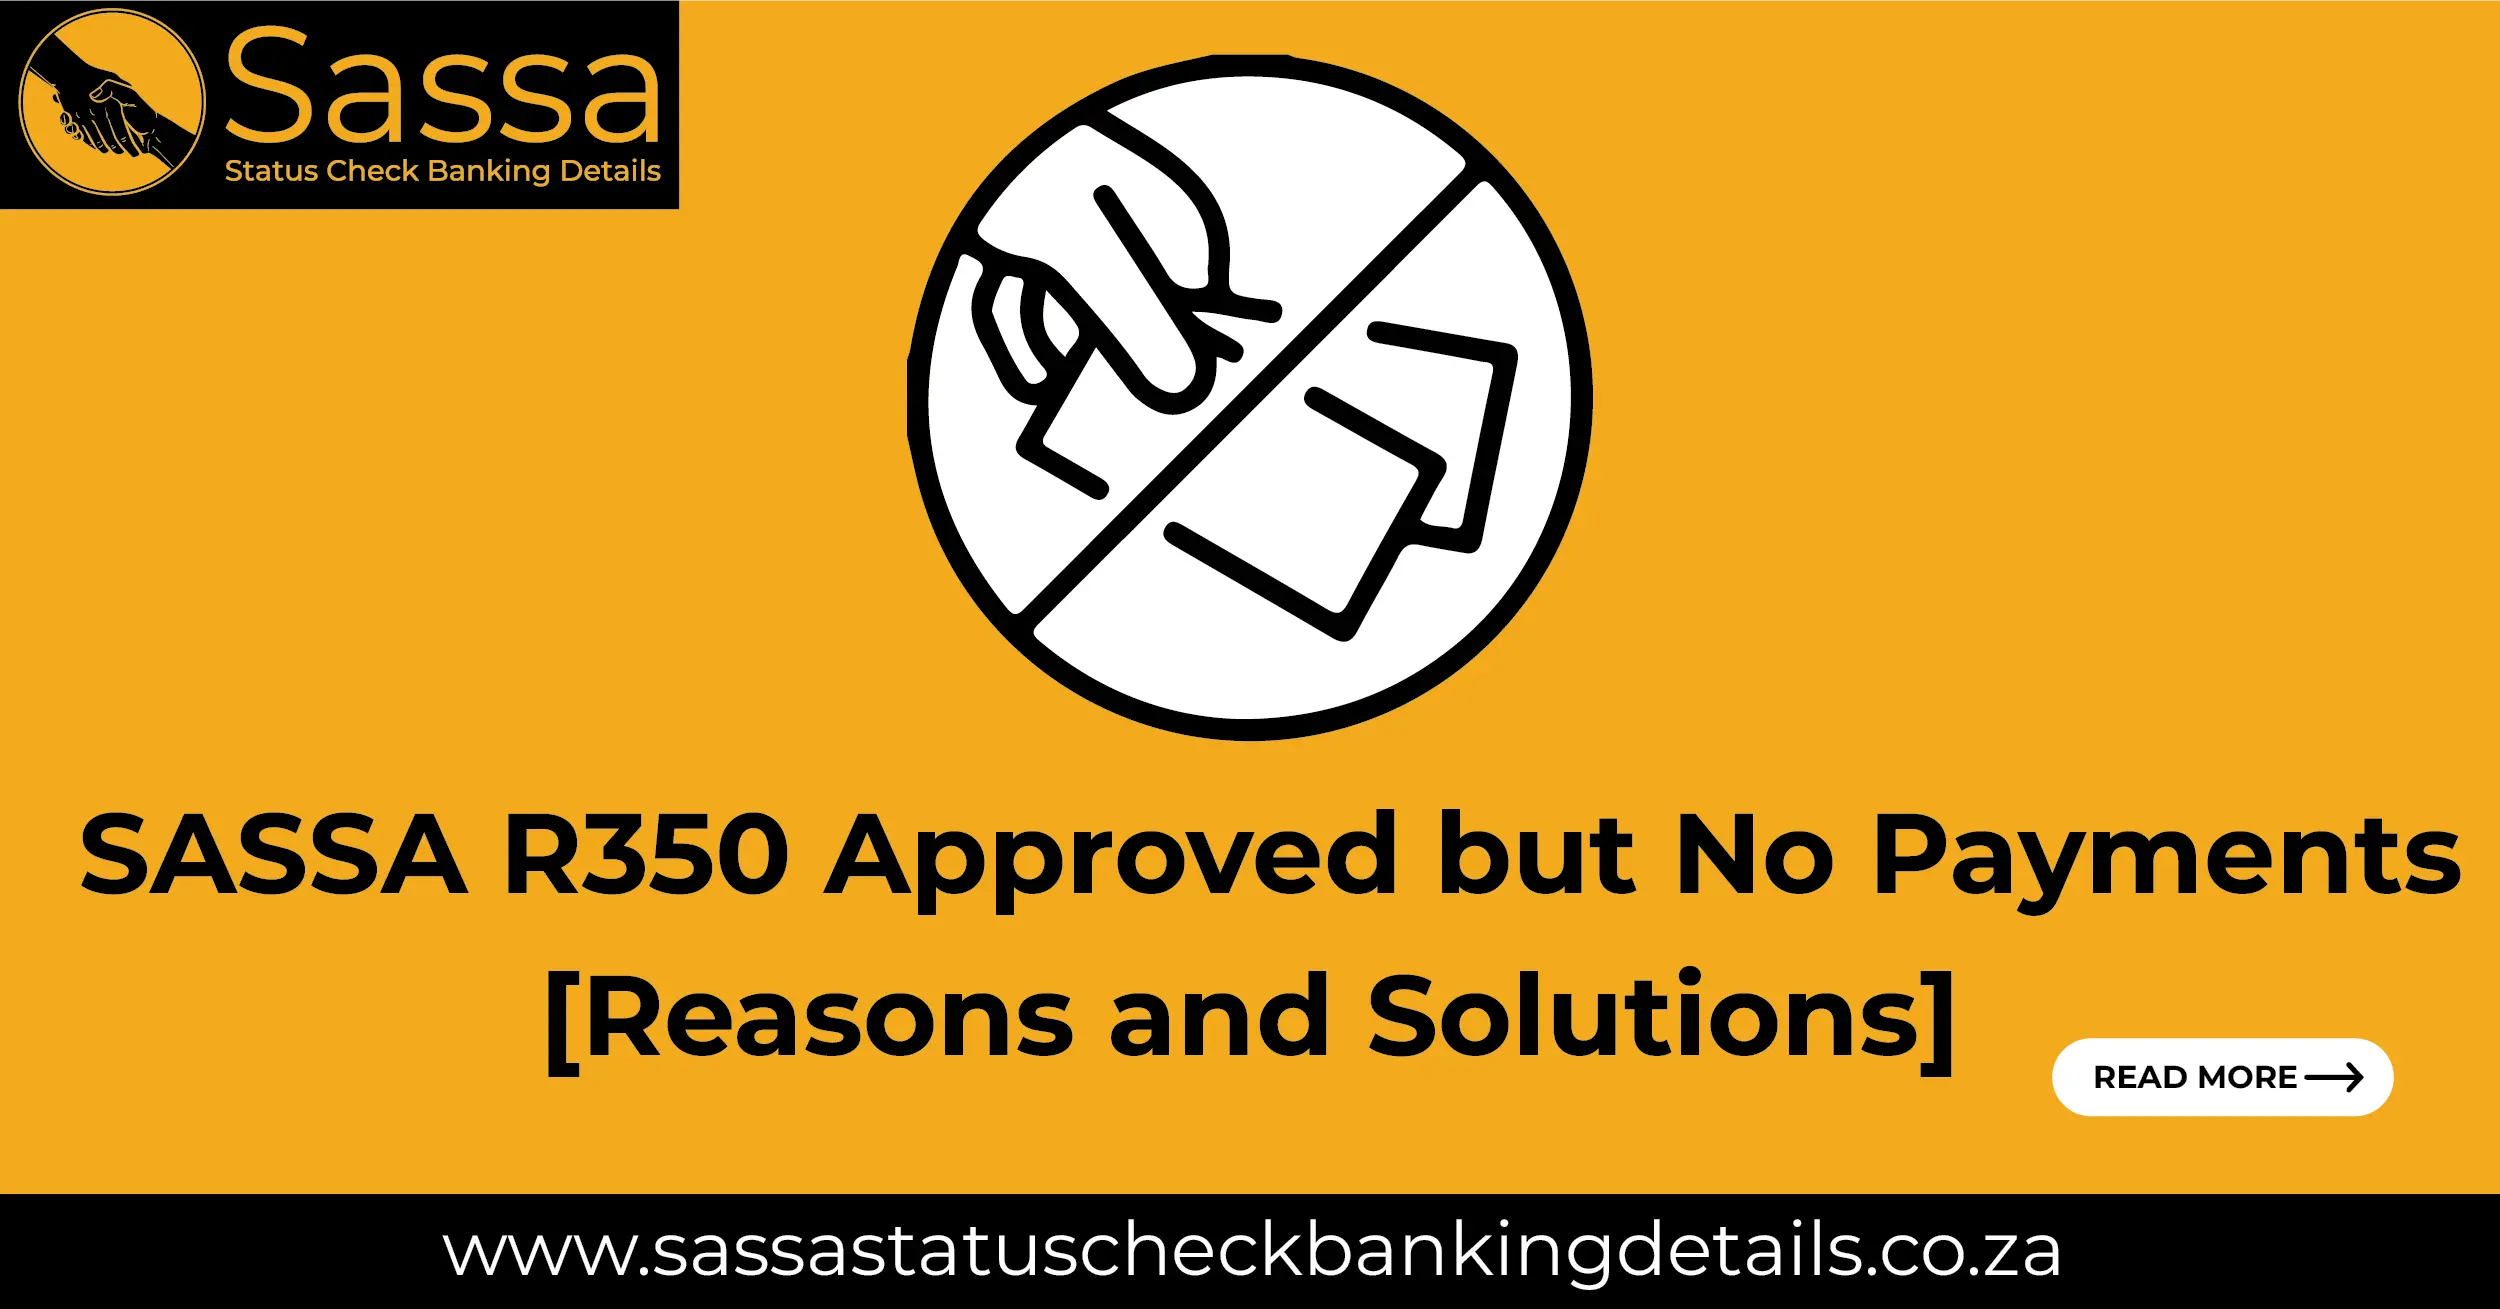 SASSA R350 Approved but No Payments? Reasons and Solutions